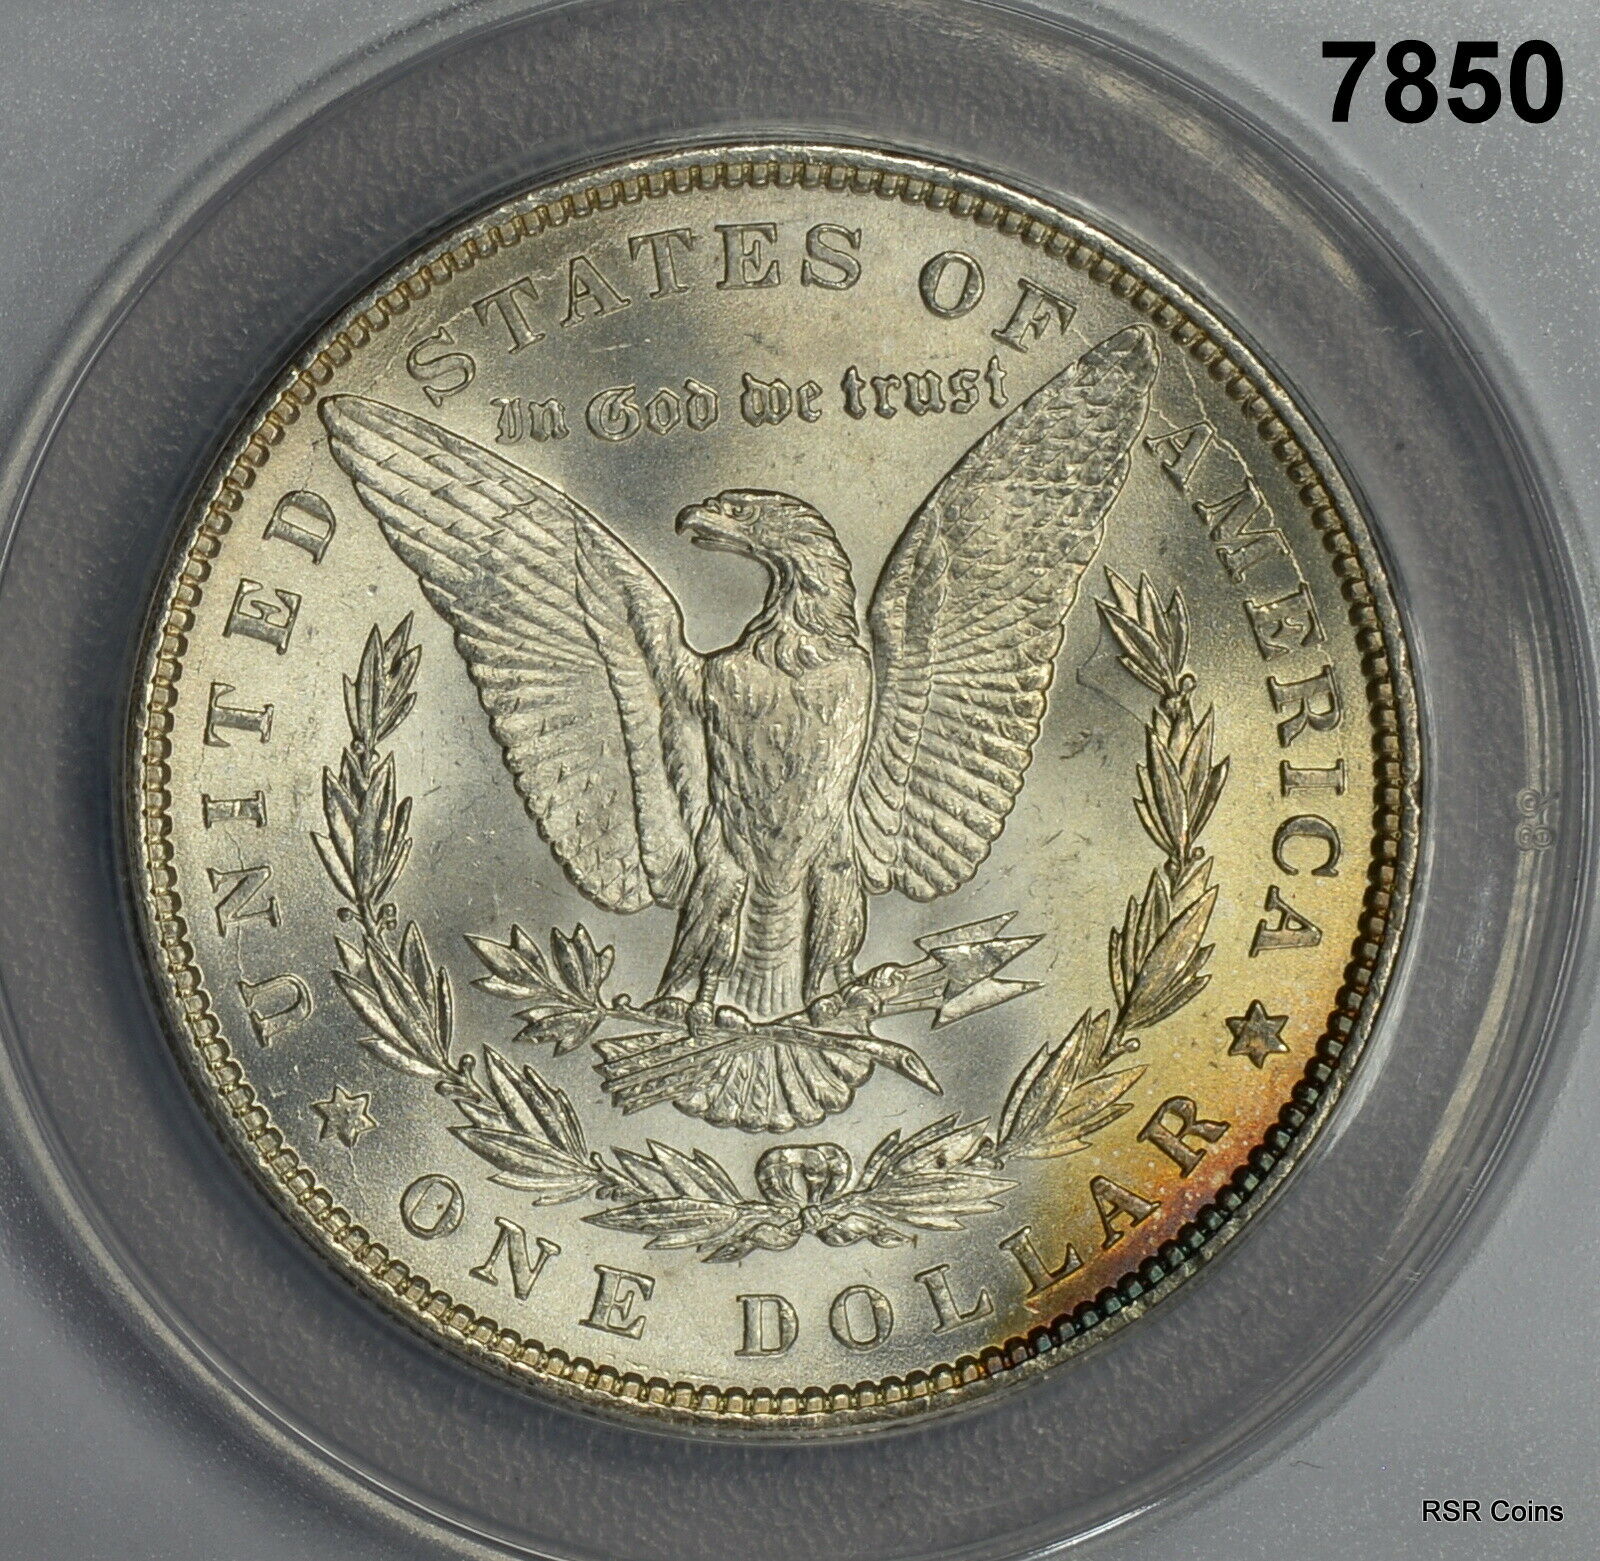 1886 MORGAN SILVER DOLLAR ANACS CERTIFIED MS65 SPLASHES OF GOLDEN COLOR! #7850